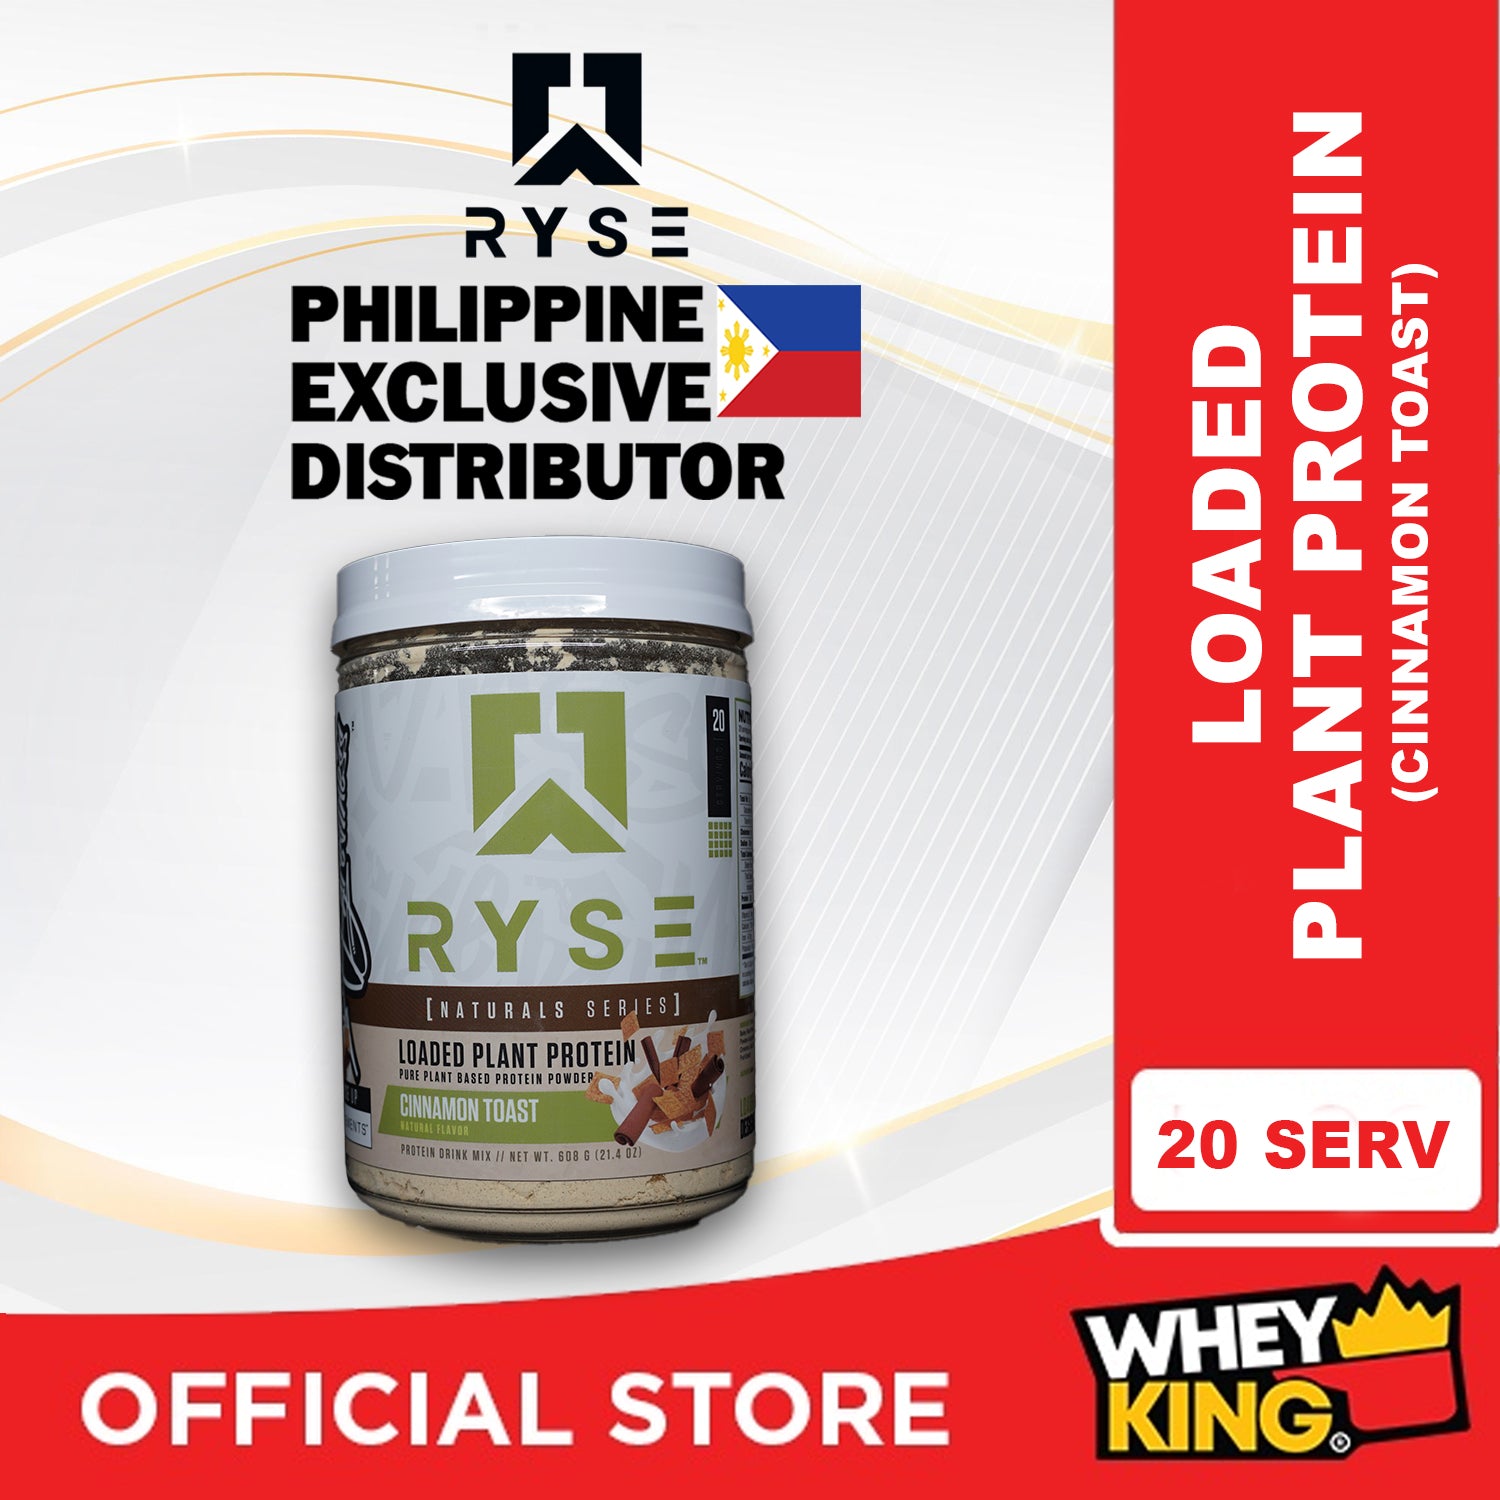 RYSE Loaded Plant Protein I 20 Servings